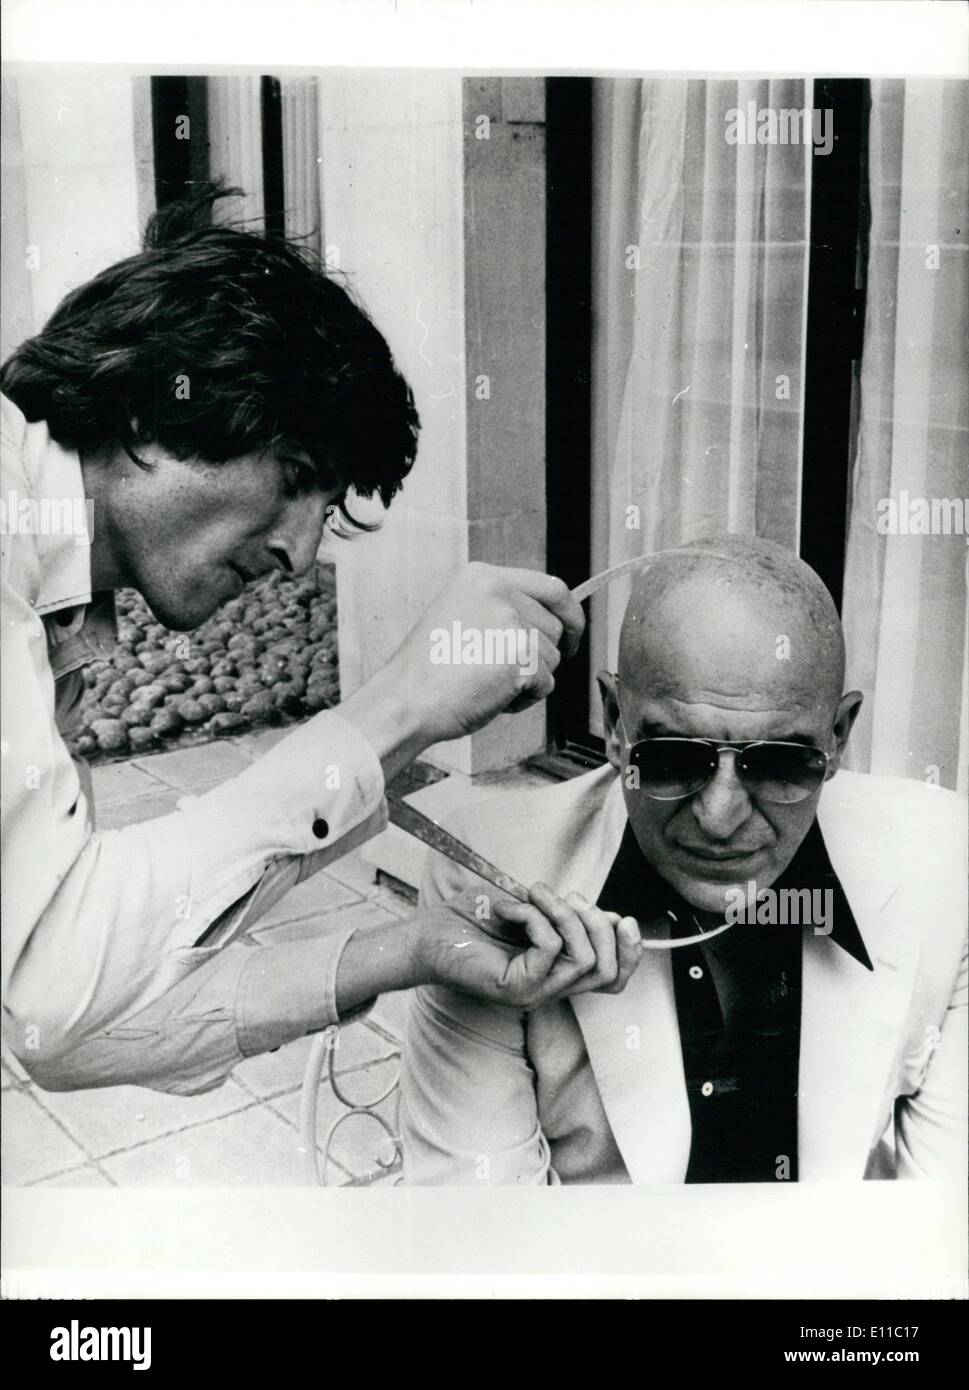 Sep. 09, 1976 - Kojak; Is Measured Up For Madame Tussaud's:Photo Shows Madame Tussaud's sculptor, Stuart Smith, takes caliper measurement during a sitting with Kojak (Telly Savalas) at the Inn of the Park Hotel, London, The wax figure of Telly will take its place later this year in ''Heroes'' at Madame Tussaud's Stock Photo